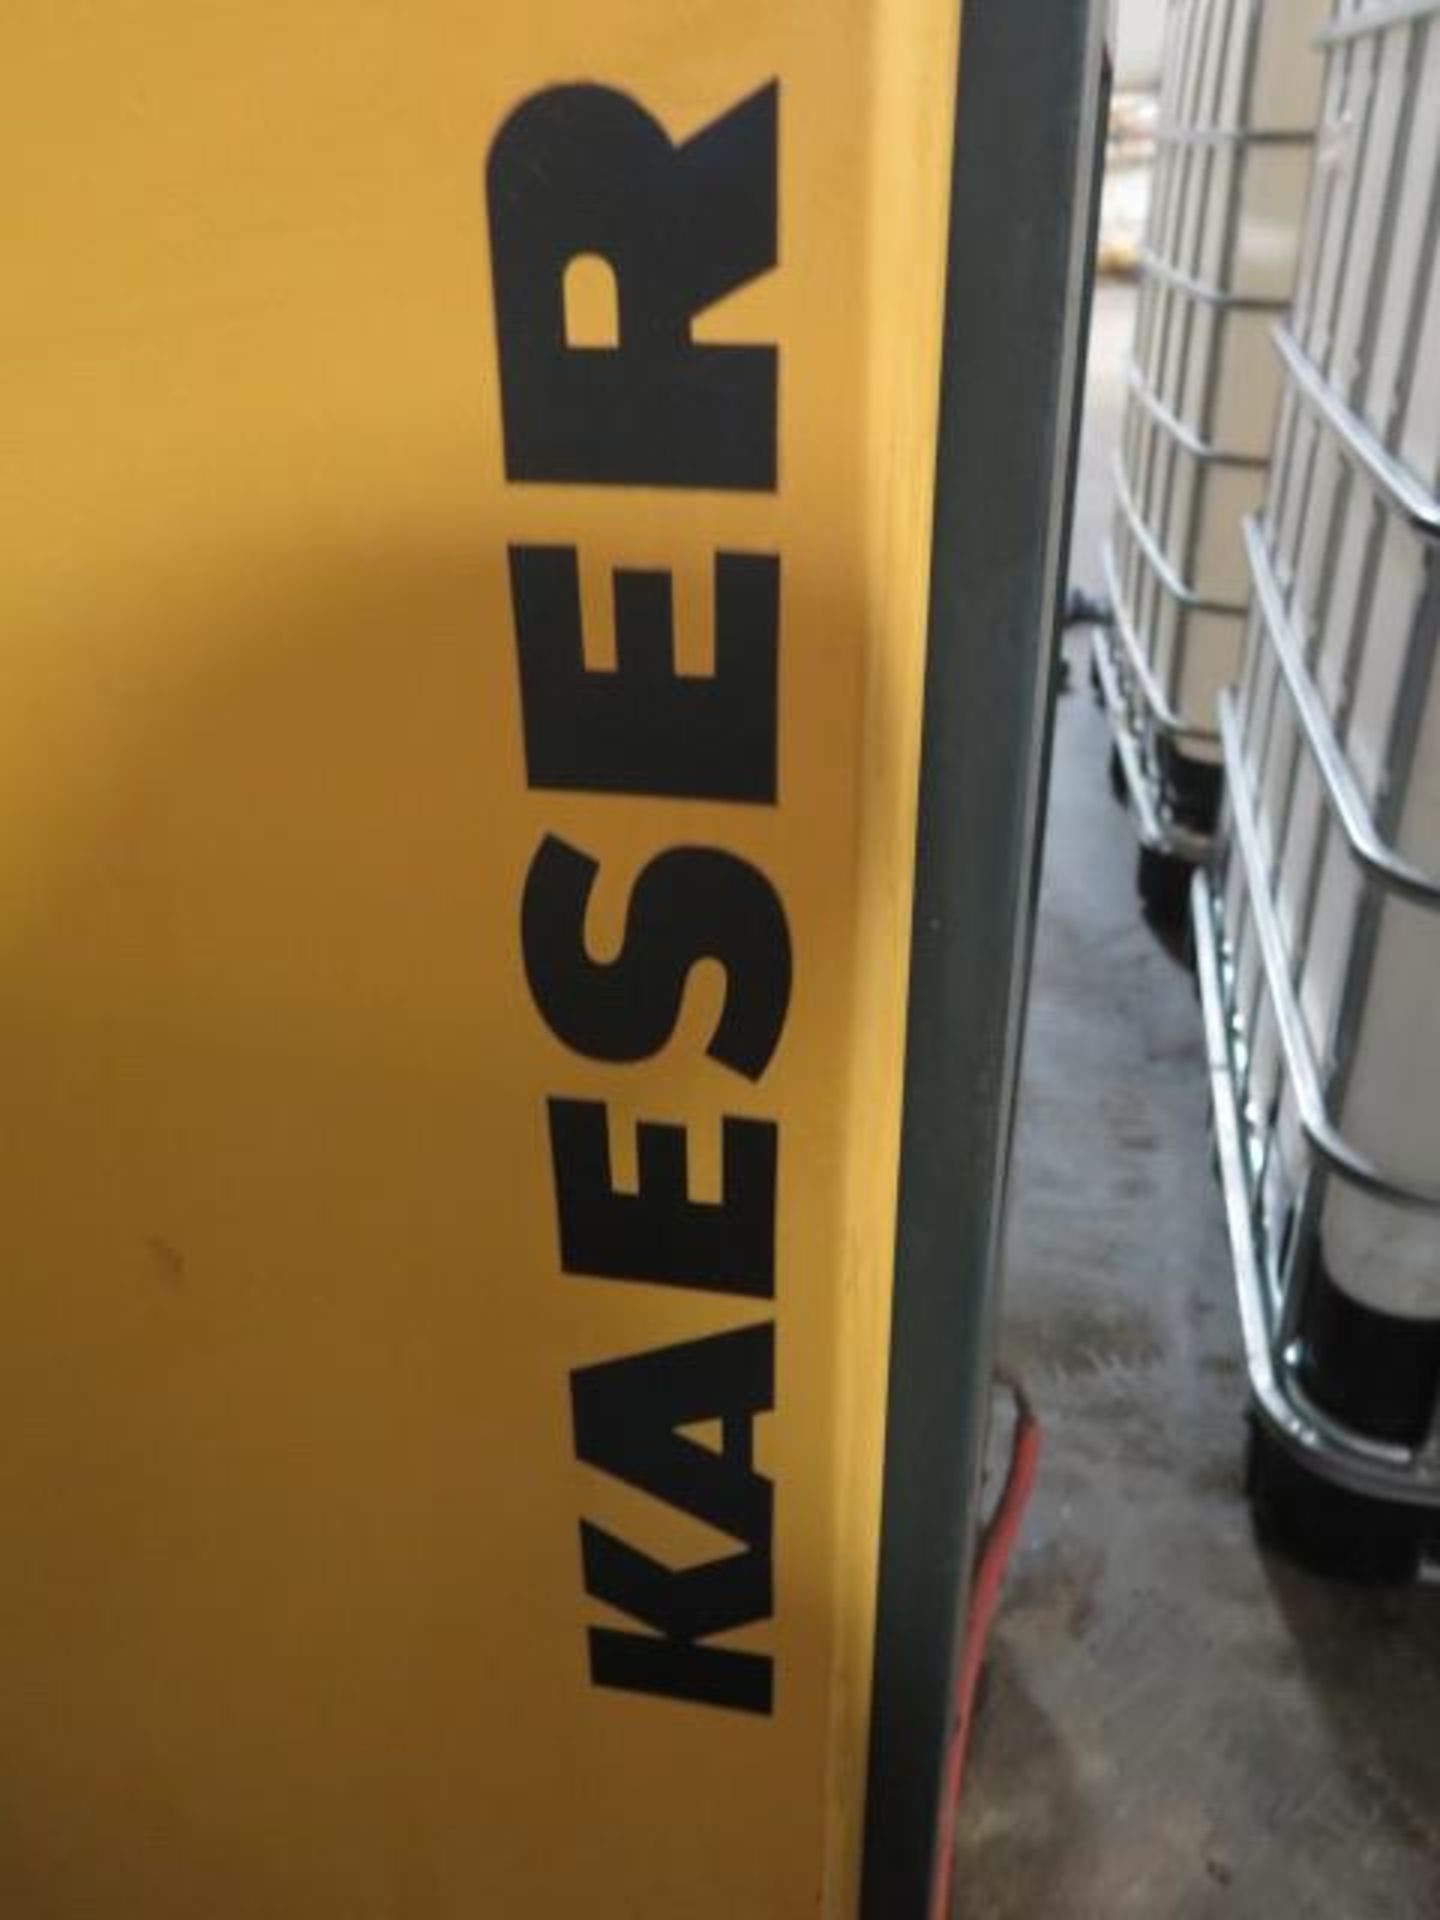 2005 Kaeser TD61 Refrigerated Air Dryer s/n 1187 (SOLD AS-IS - NO WARRANTY) - Image 5 of 6